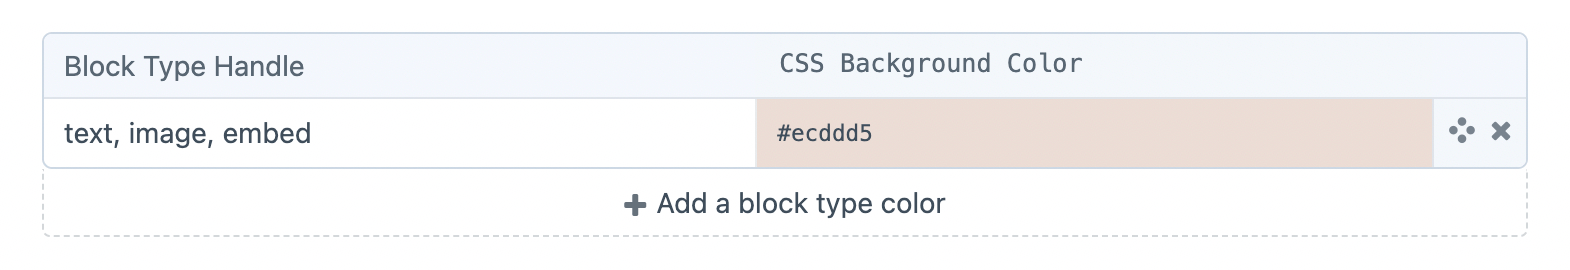 Example of multiple block types sharing the same color